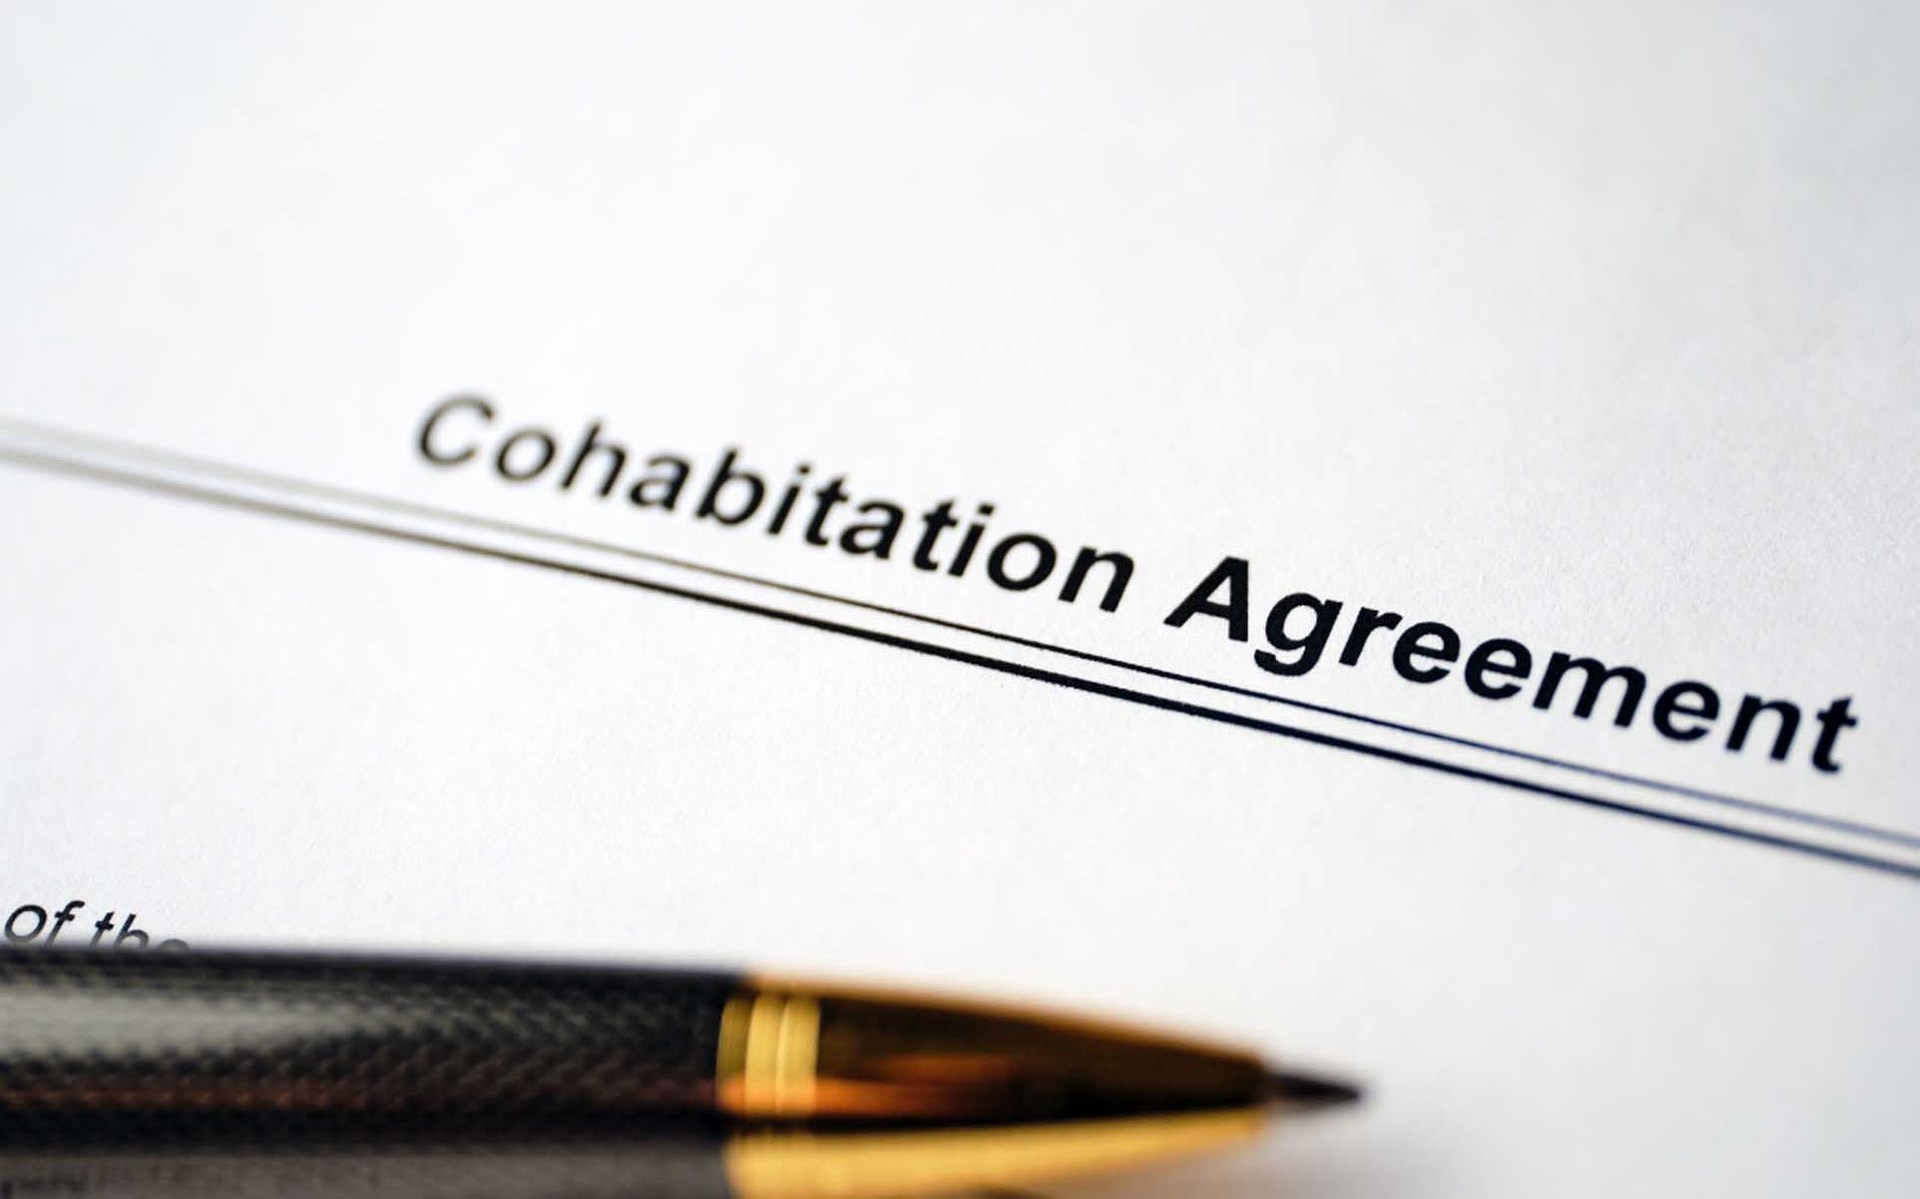 Cohabitation Lawyers in Leicester's cohabitation agreement